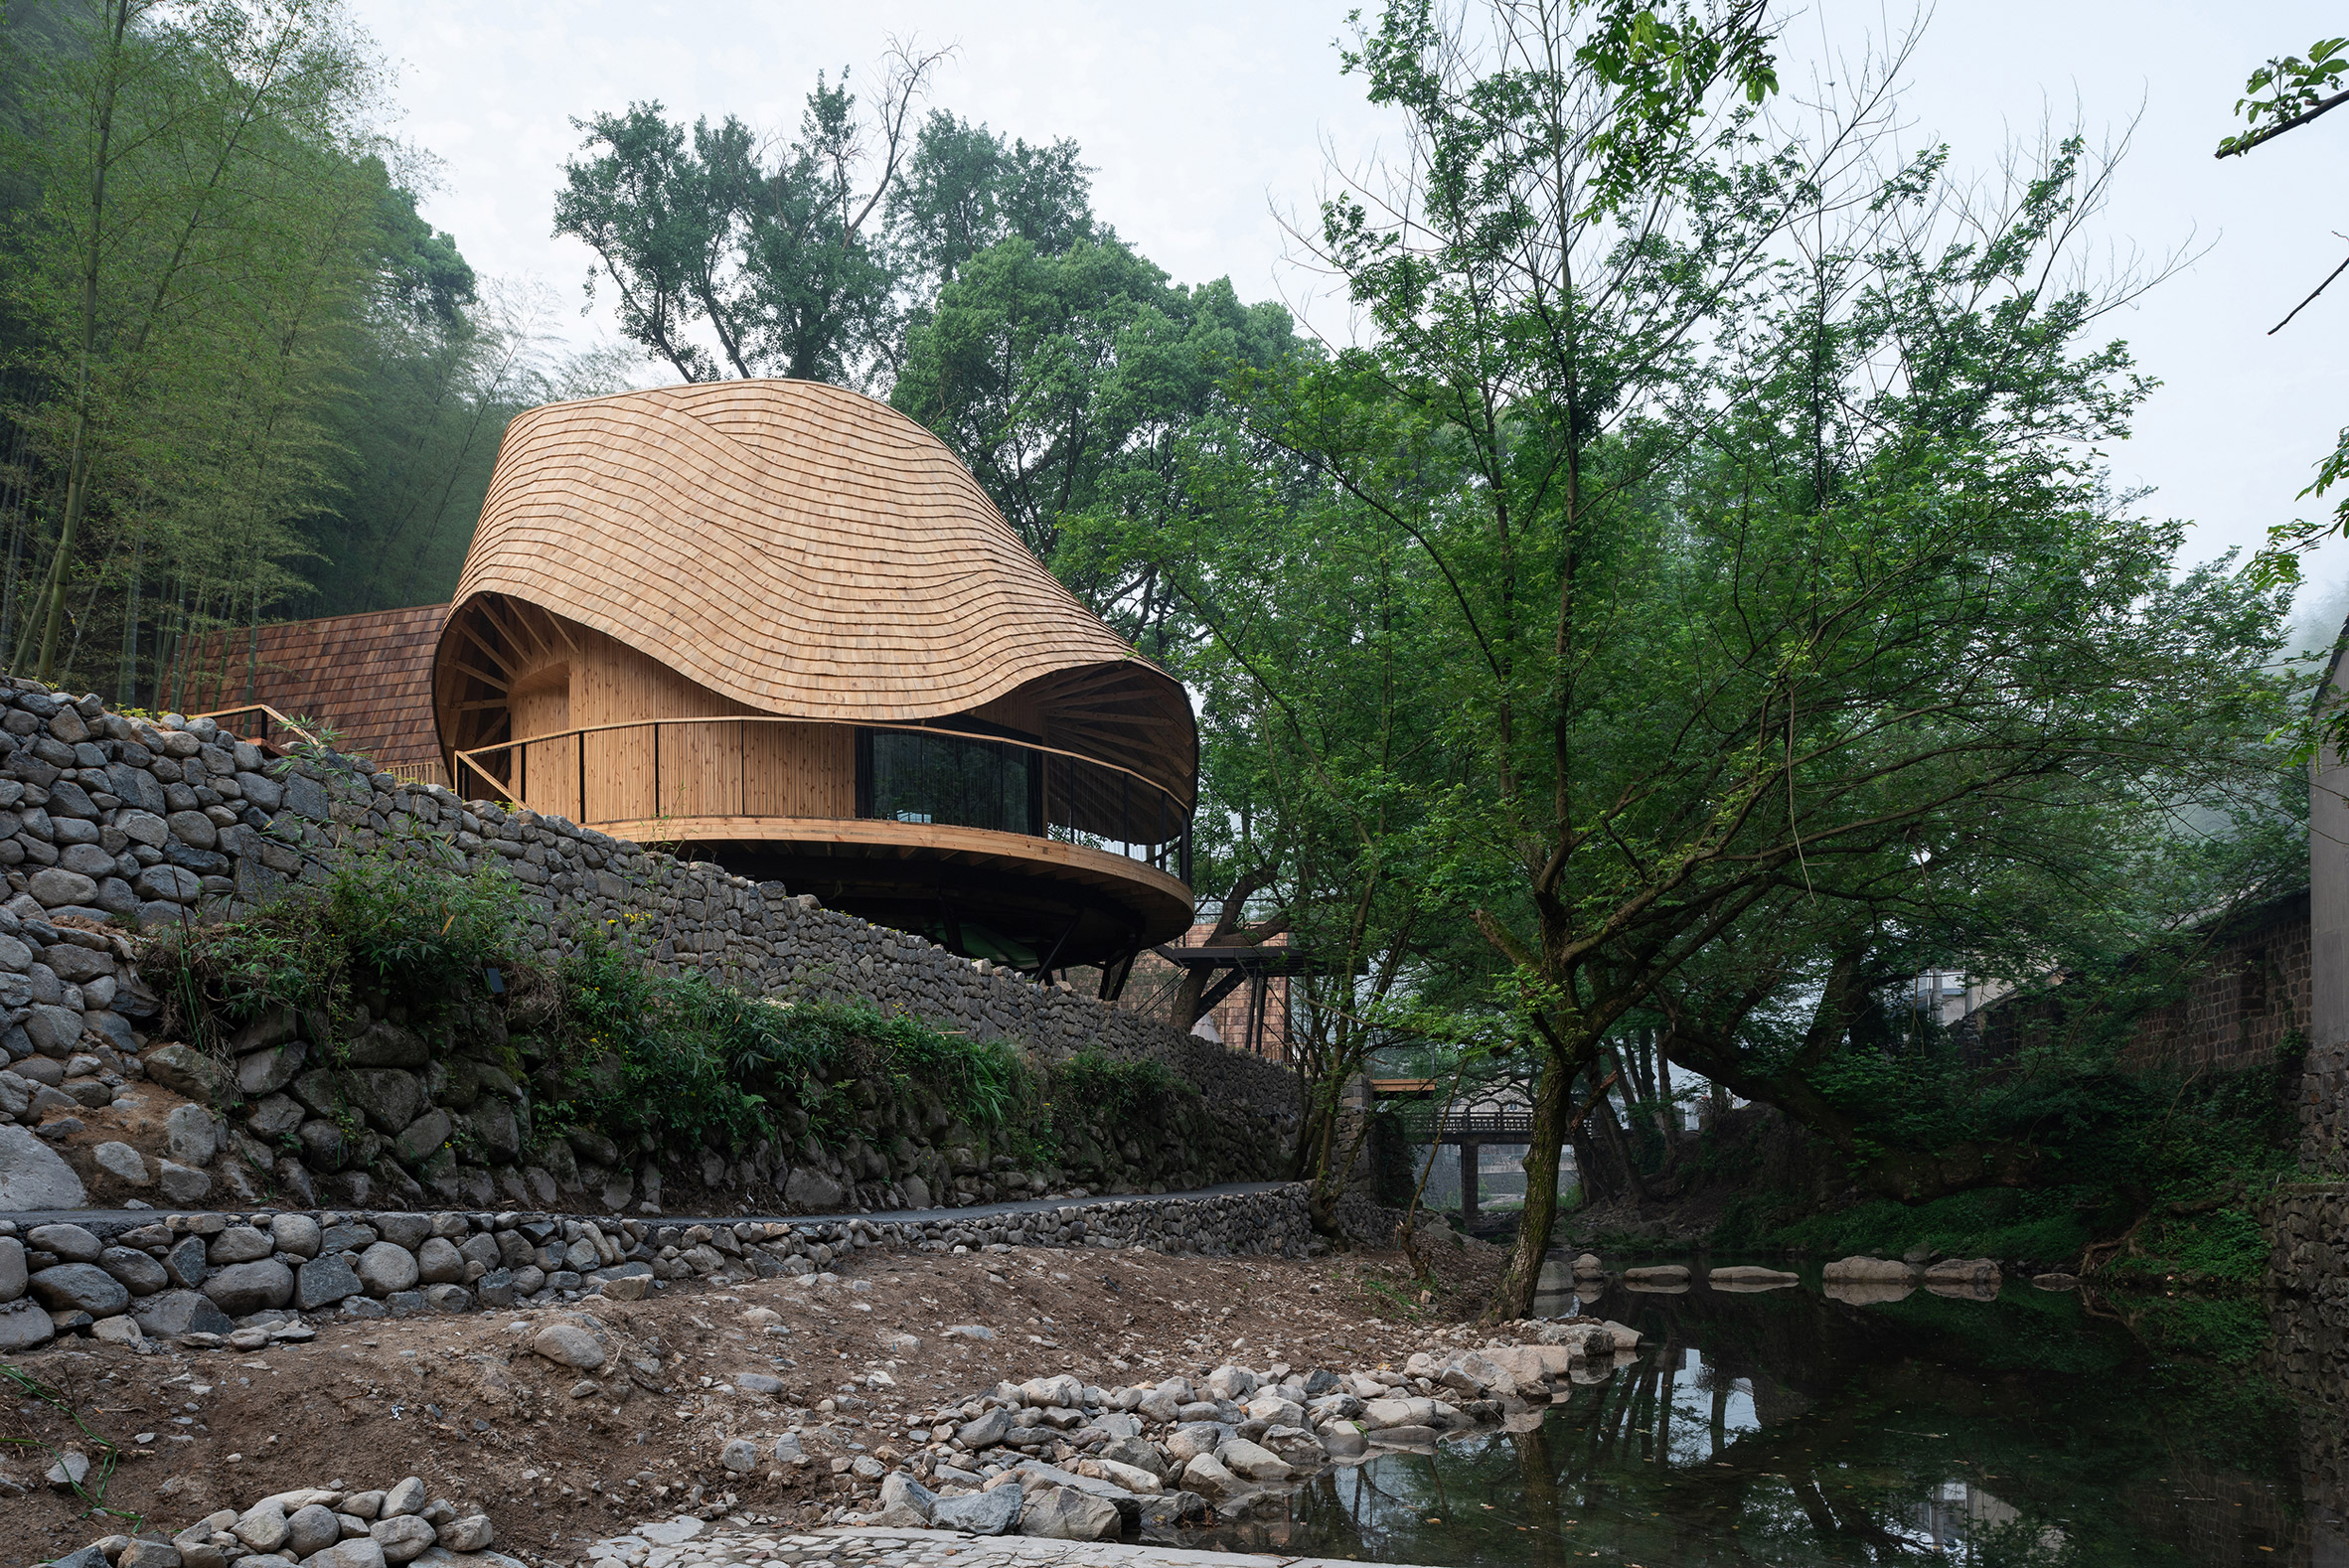 Treewow Retreat is a Chinese village house featuring a round freeform roof